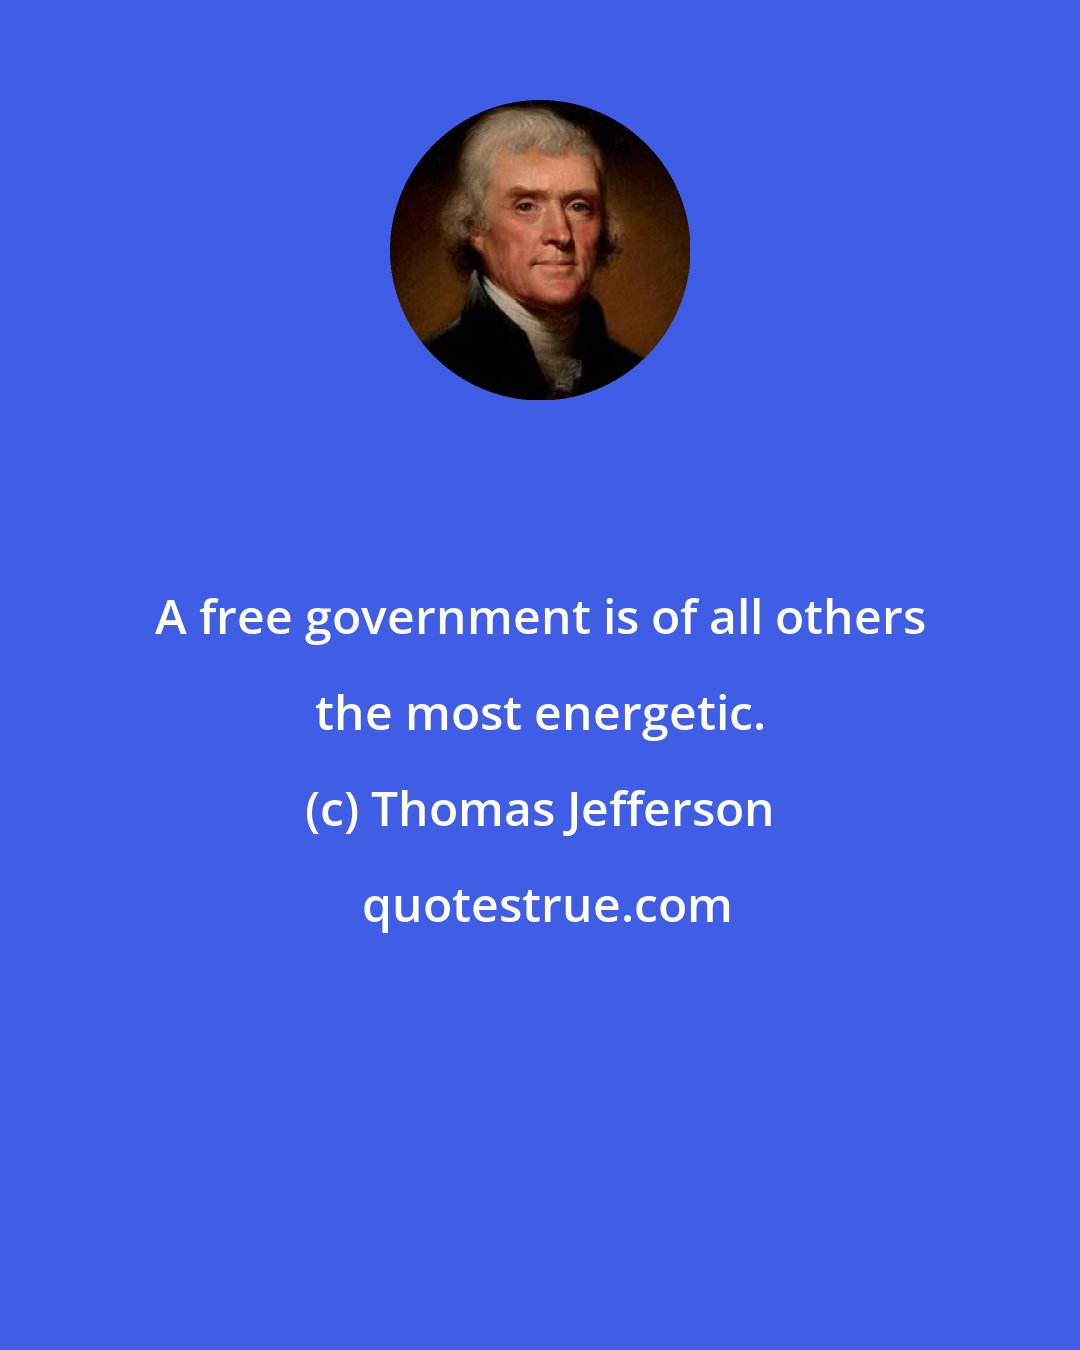 Thomas Jefferson: A free government is of all others the most energetic.